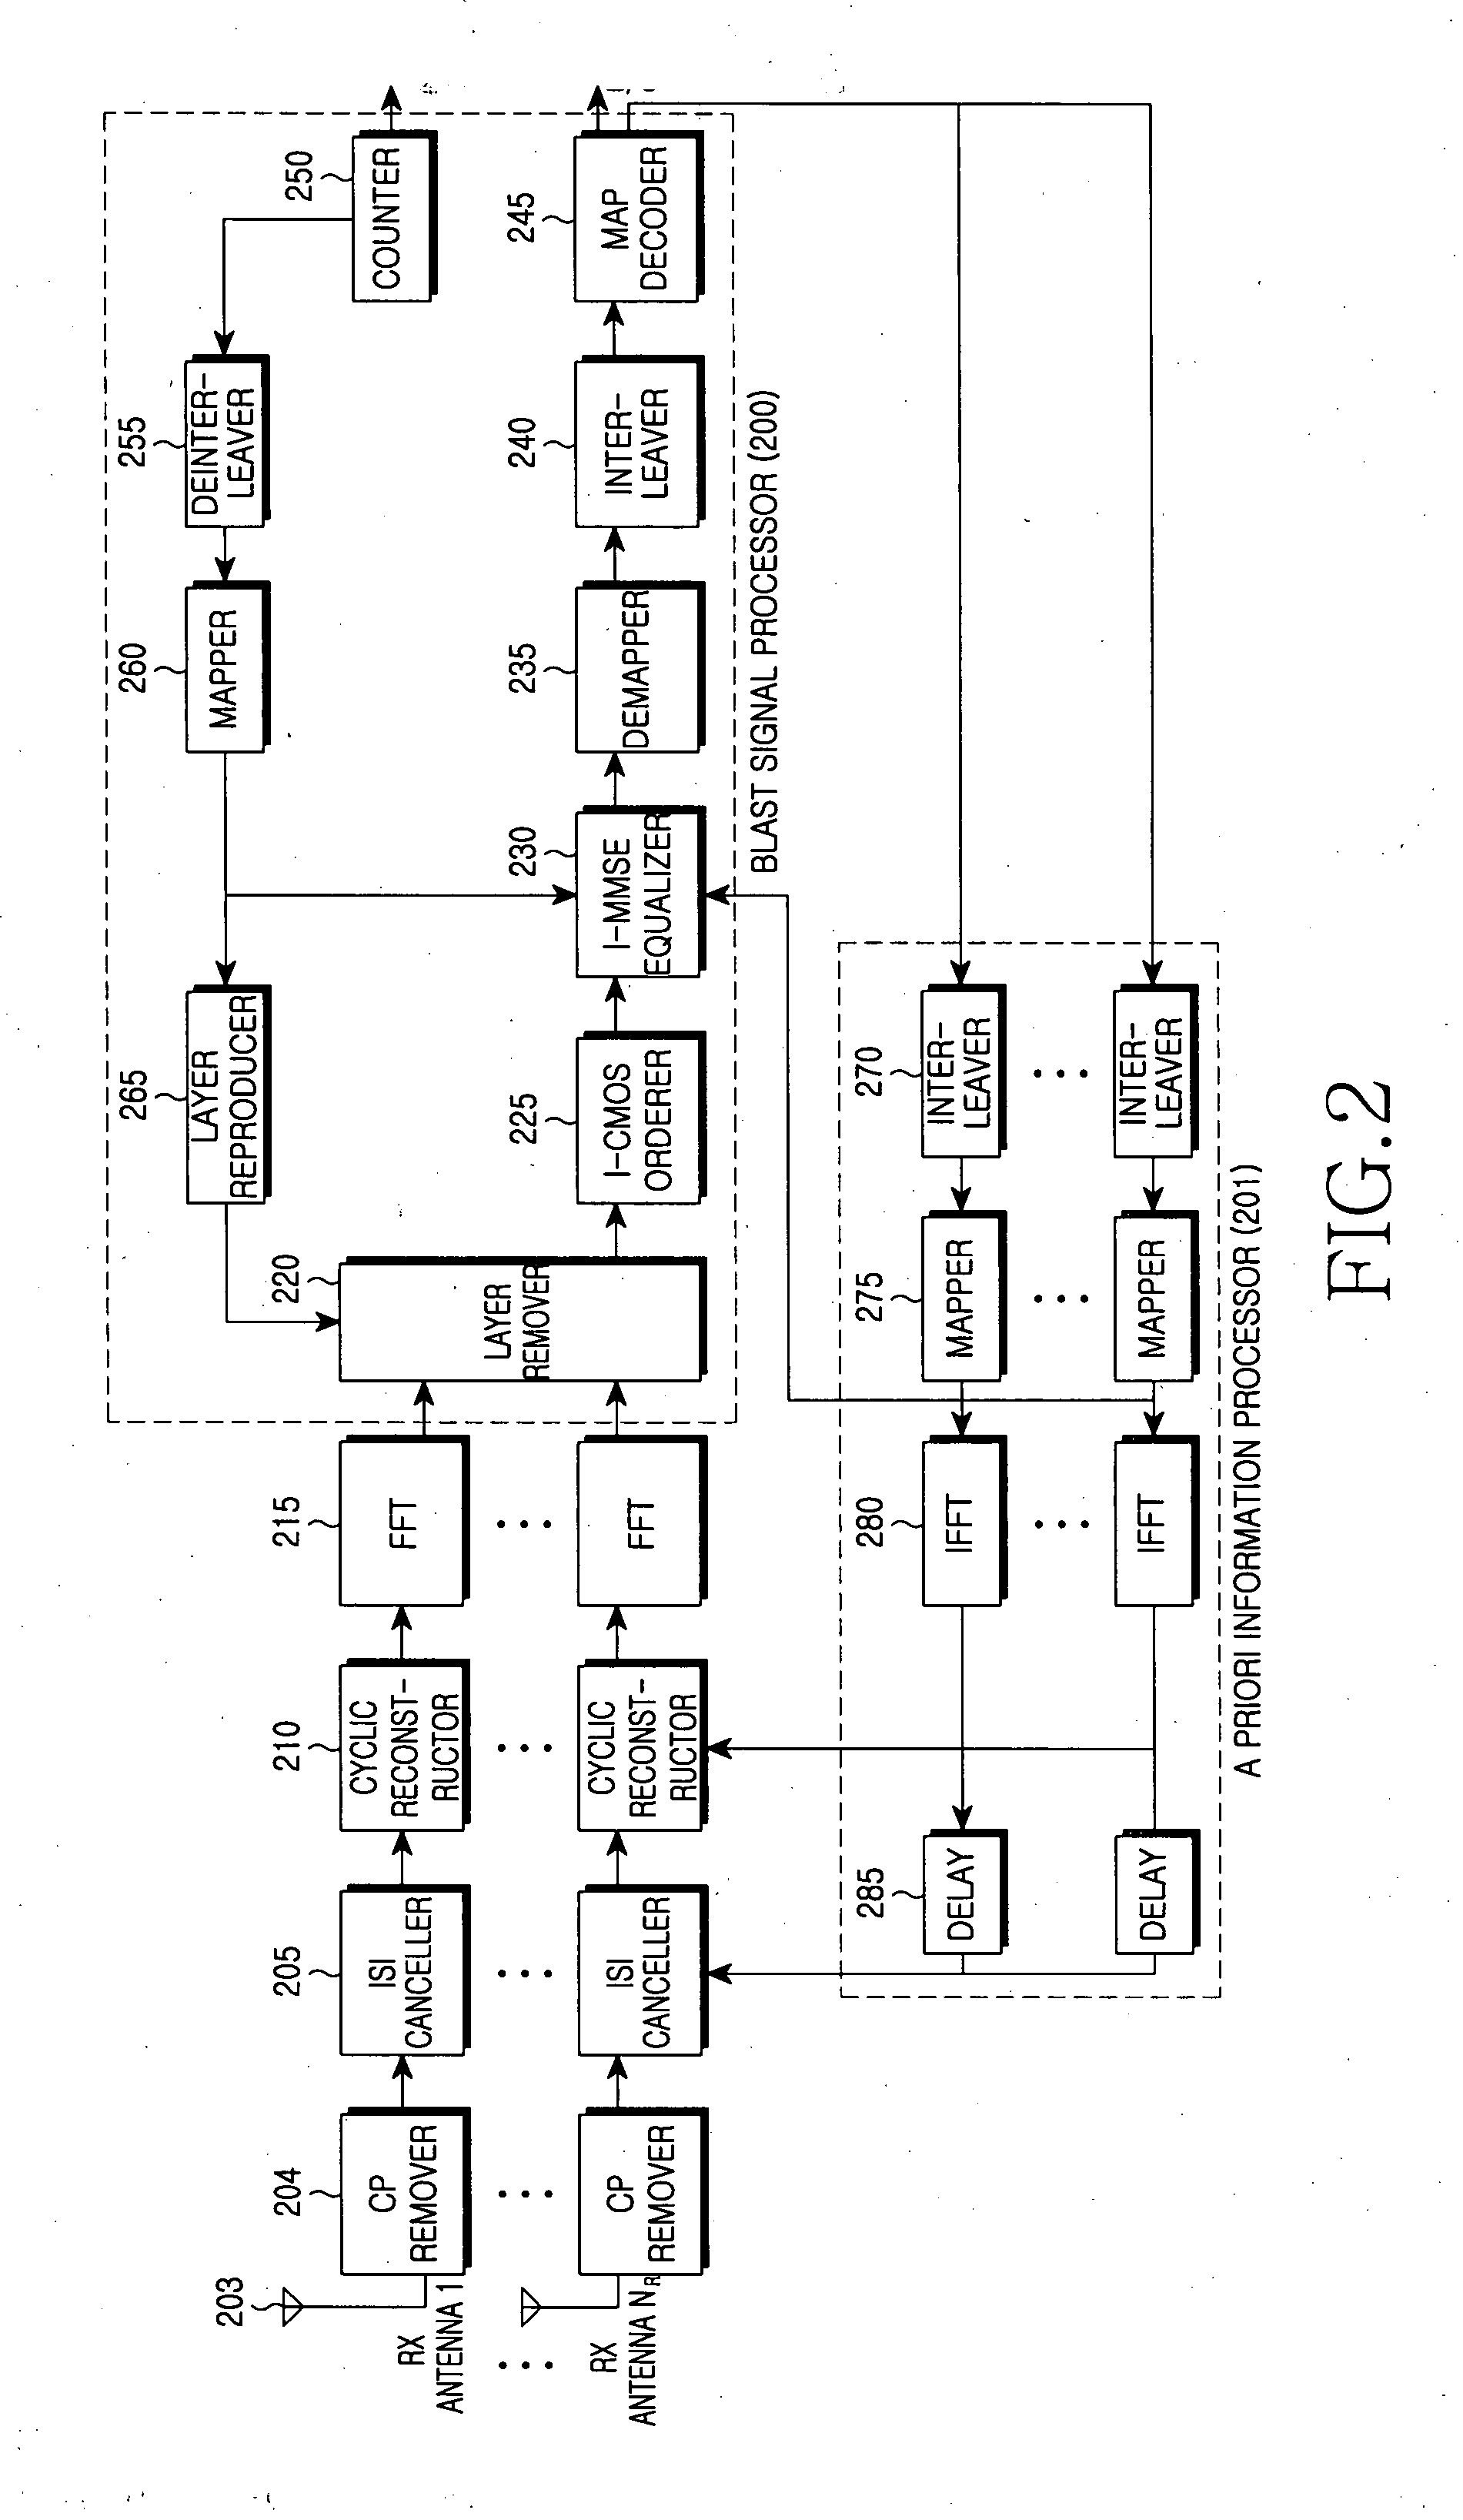 Inter-carrier interference cancellation method and receiver using the same in a MIMO-OFDM system